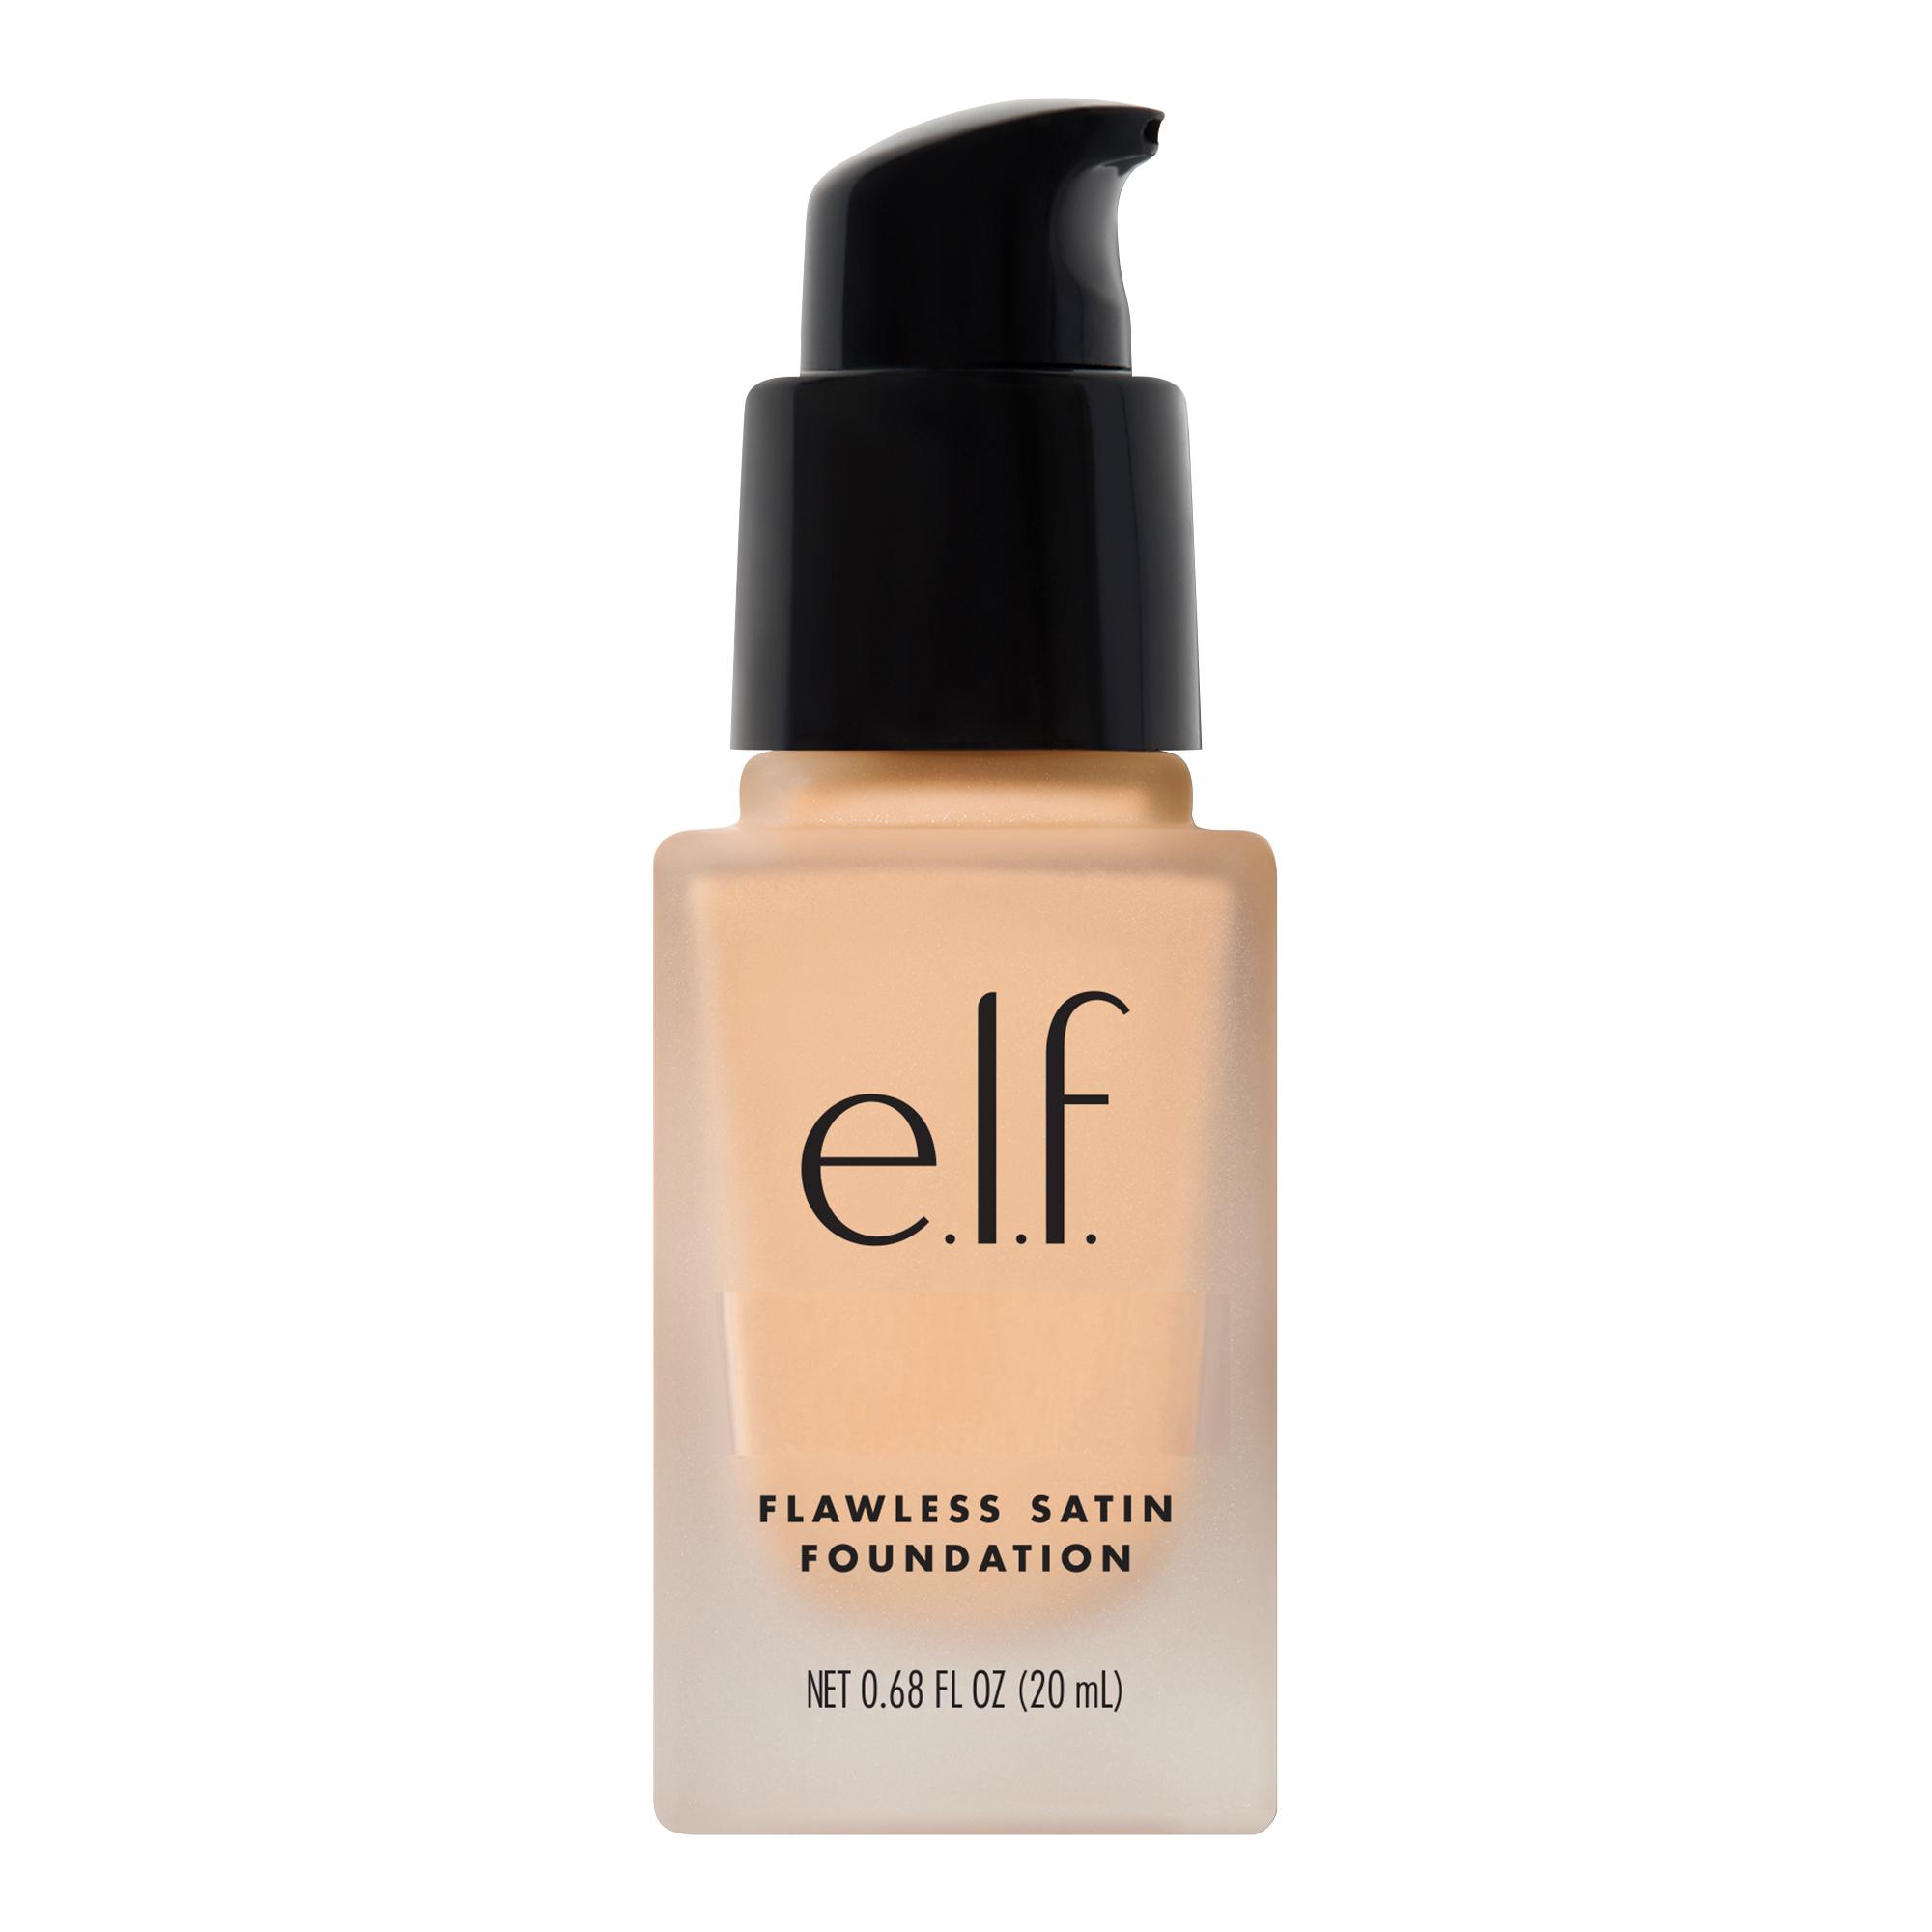 e.l.f. Flawless Satin Foundation, Bisque, 0.68 fl oz - image 1 of 7